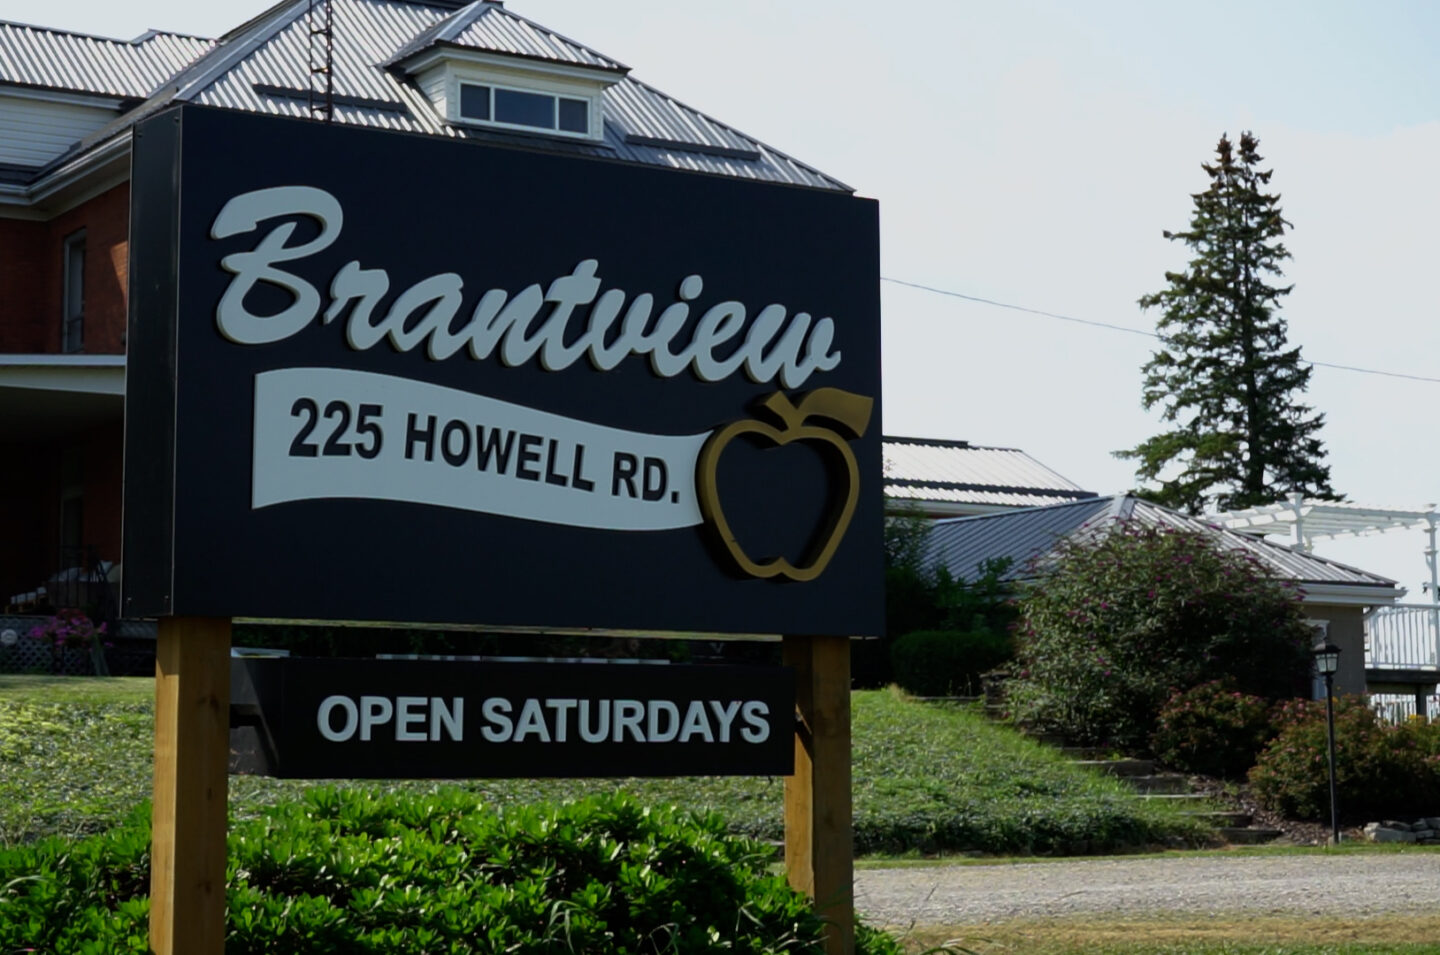 Pick Your Own Apples at Brantview Apples and Cider Farm